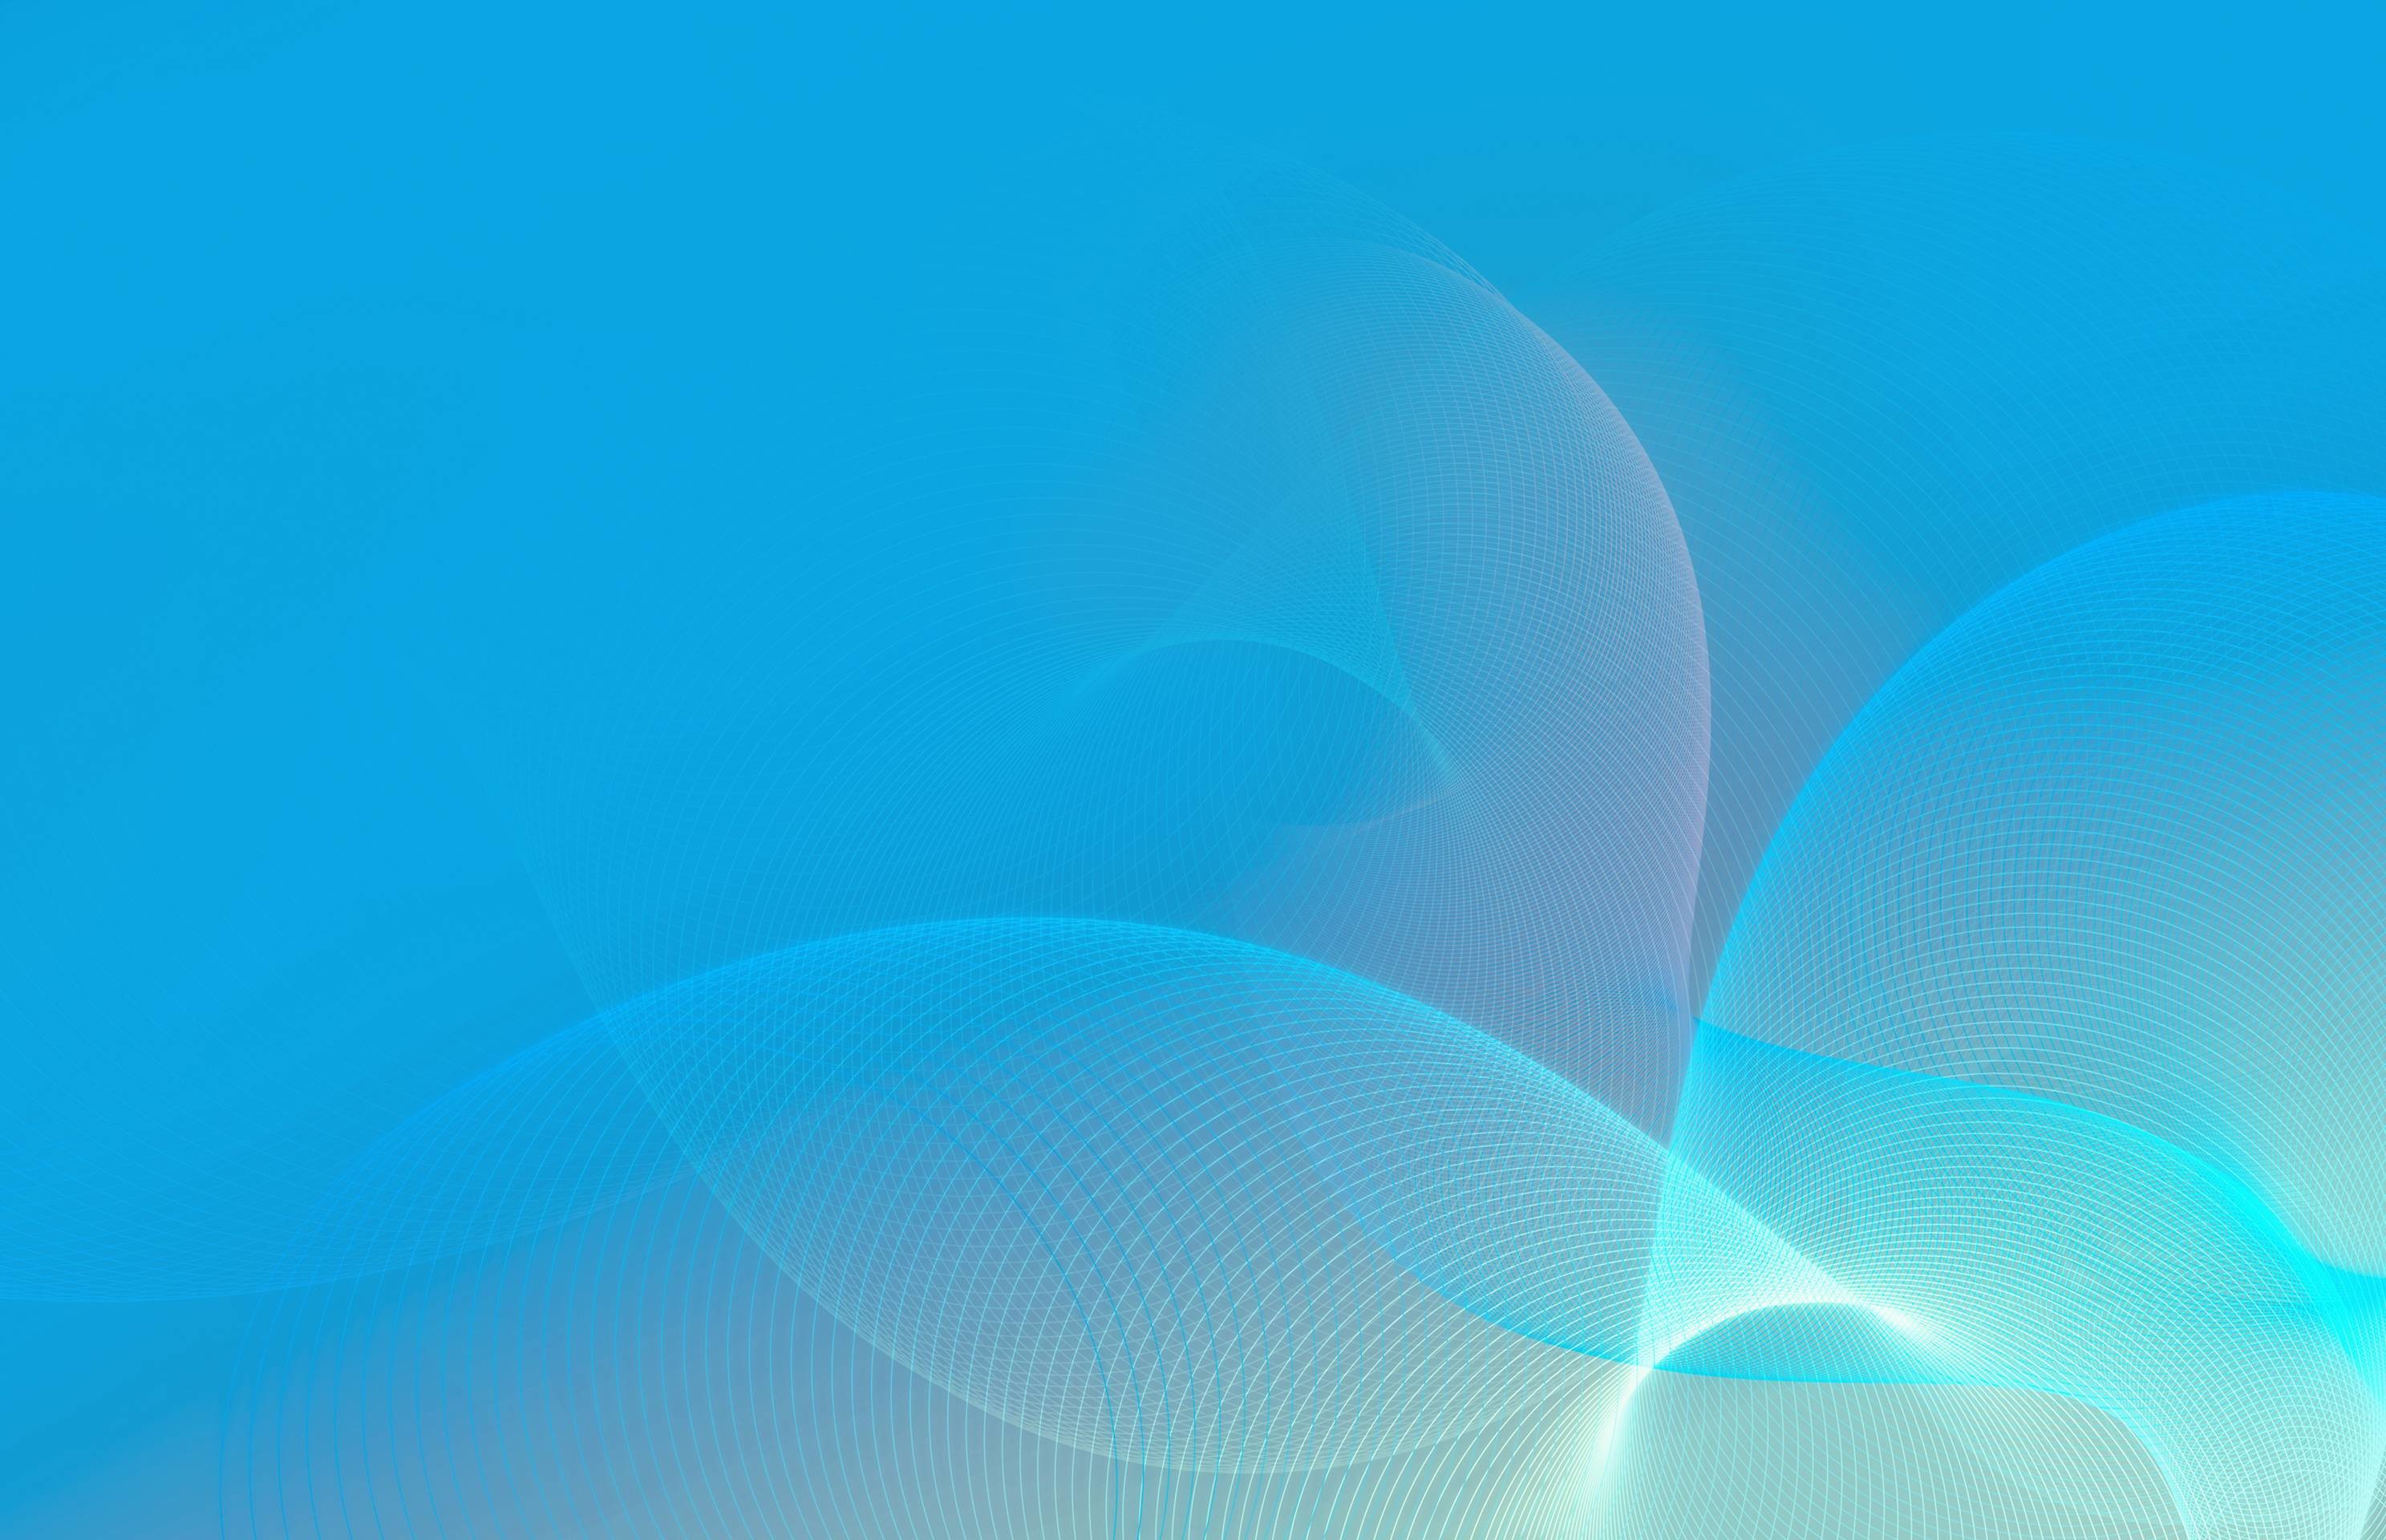 2975x1920 Wallpapers from new Nexus 7 leak out and you can download them here